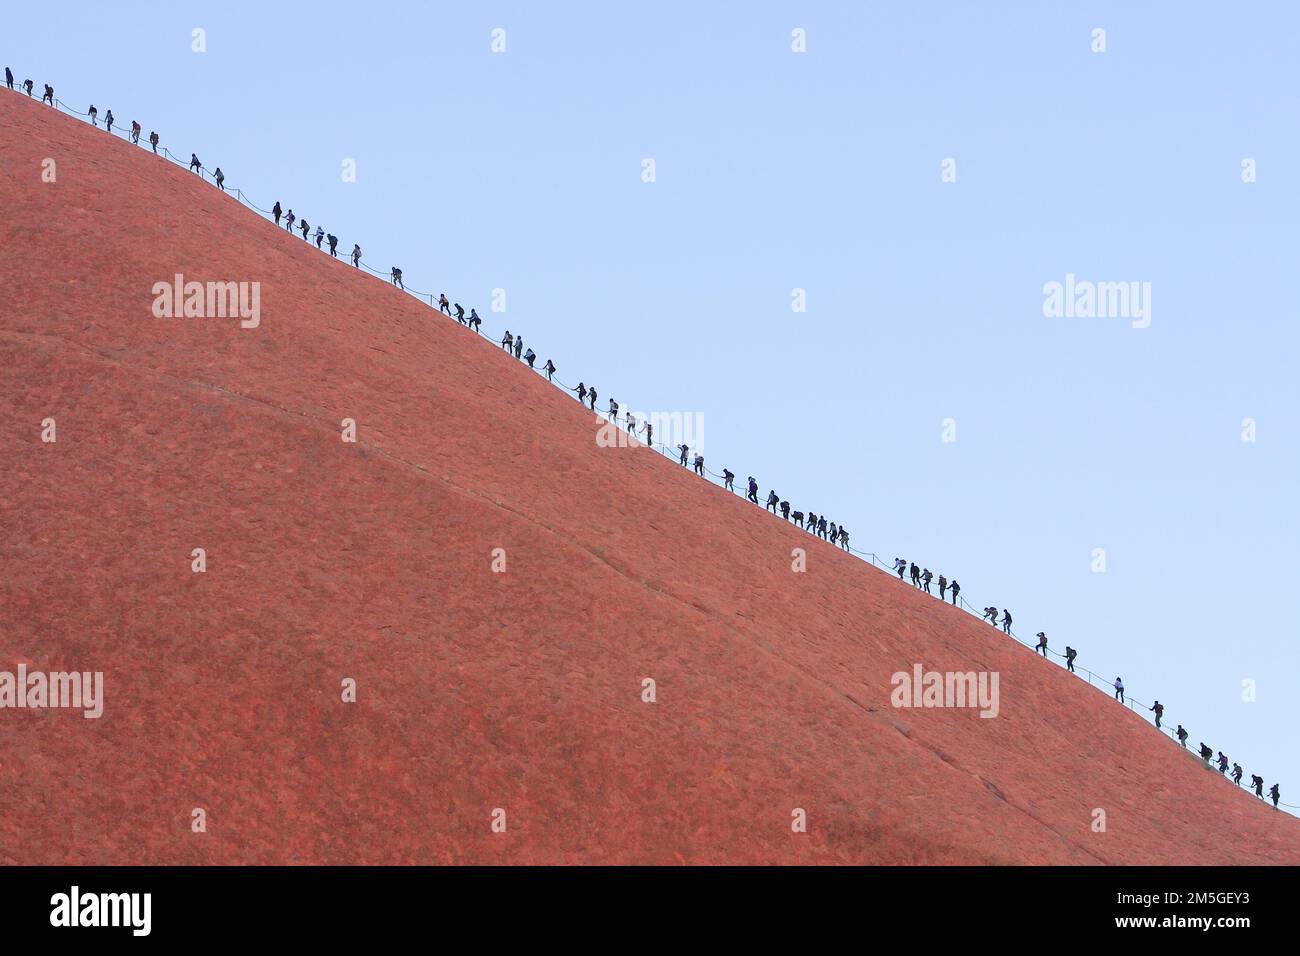 A long queue of people climbs the steep red rock face of Uluru (Ayers Rock), Australia Stock Photo